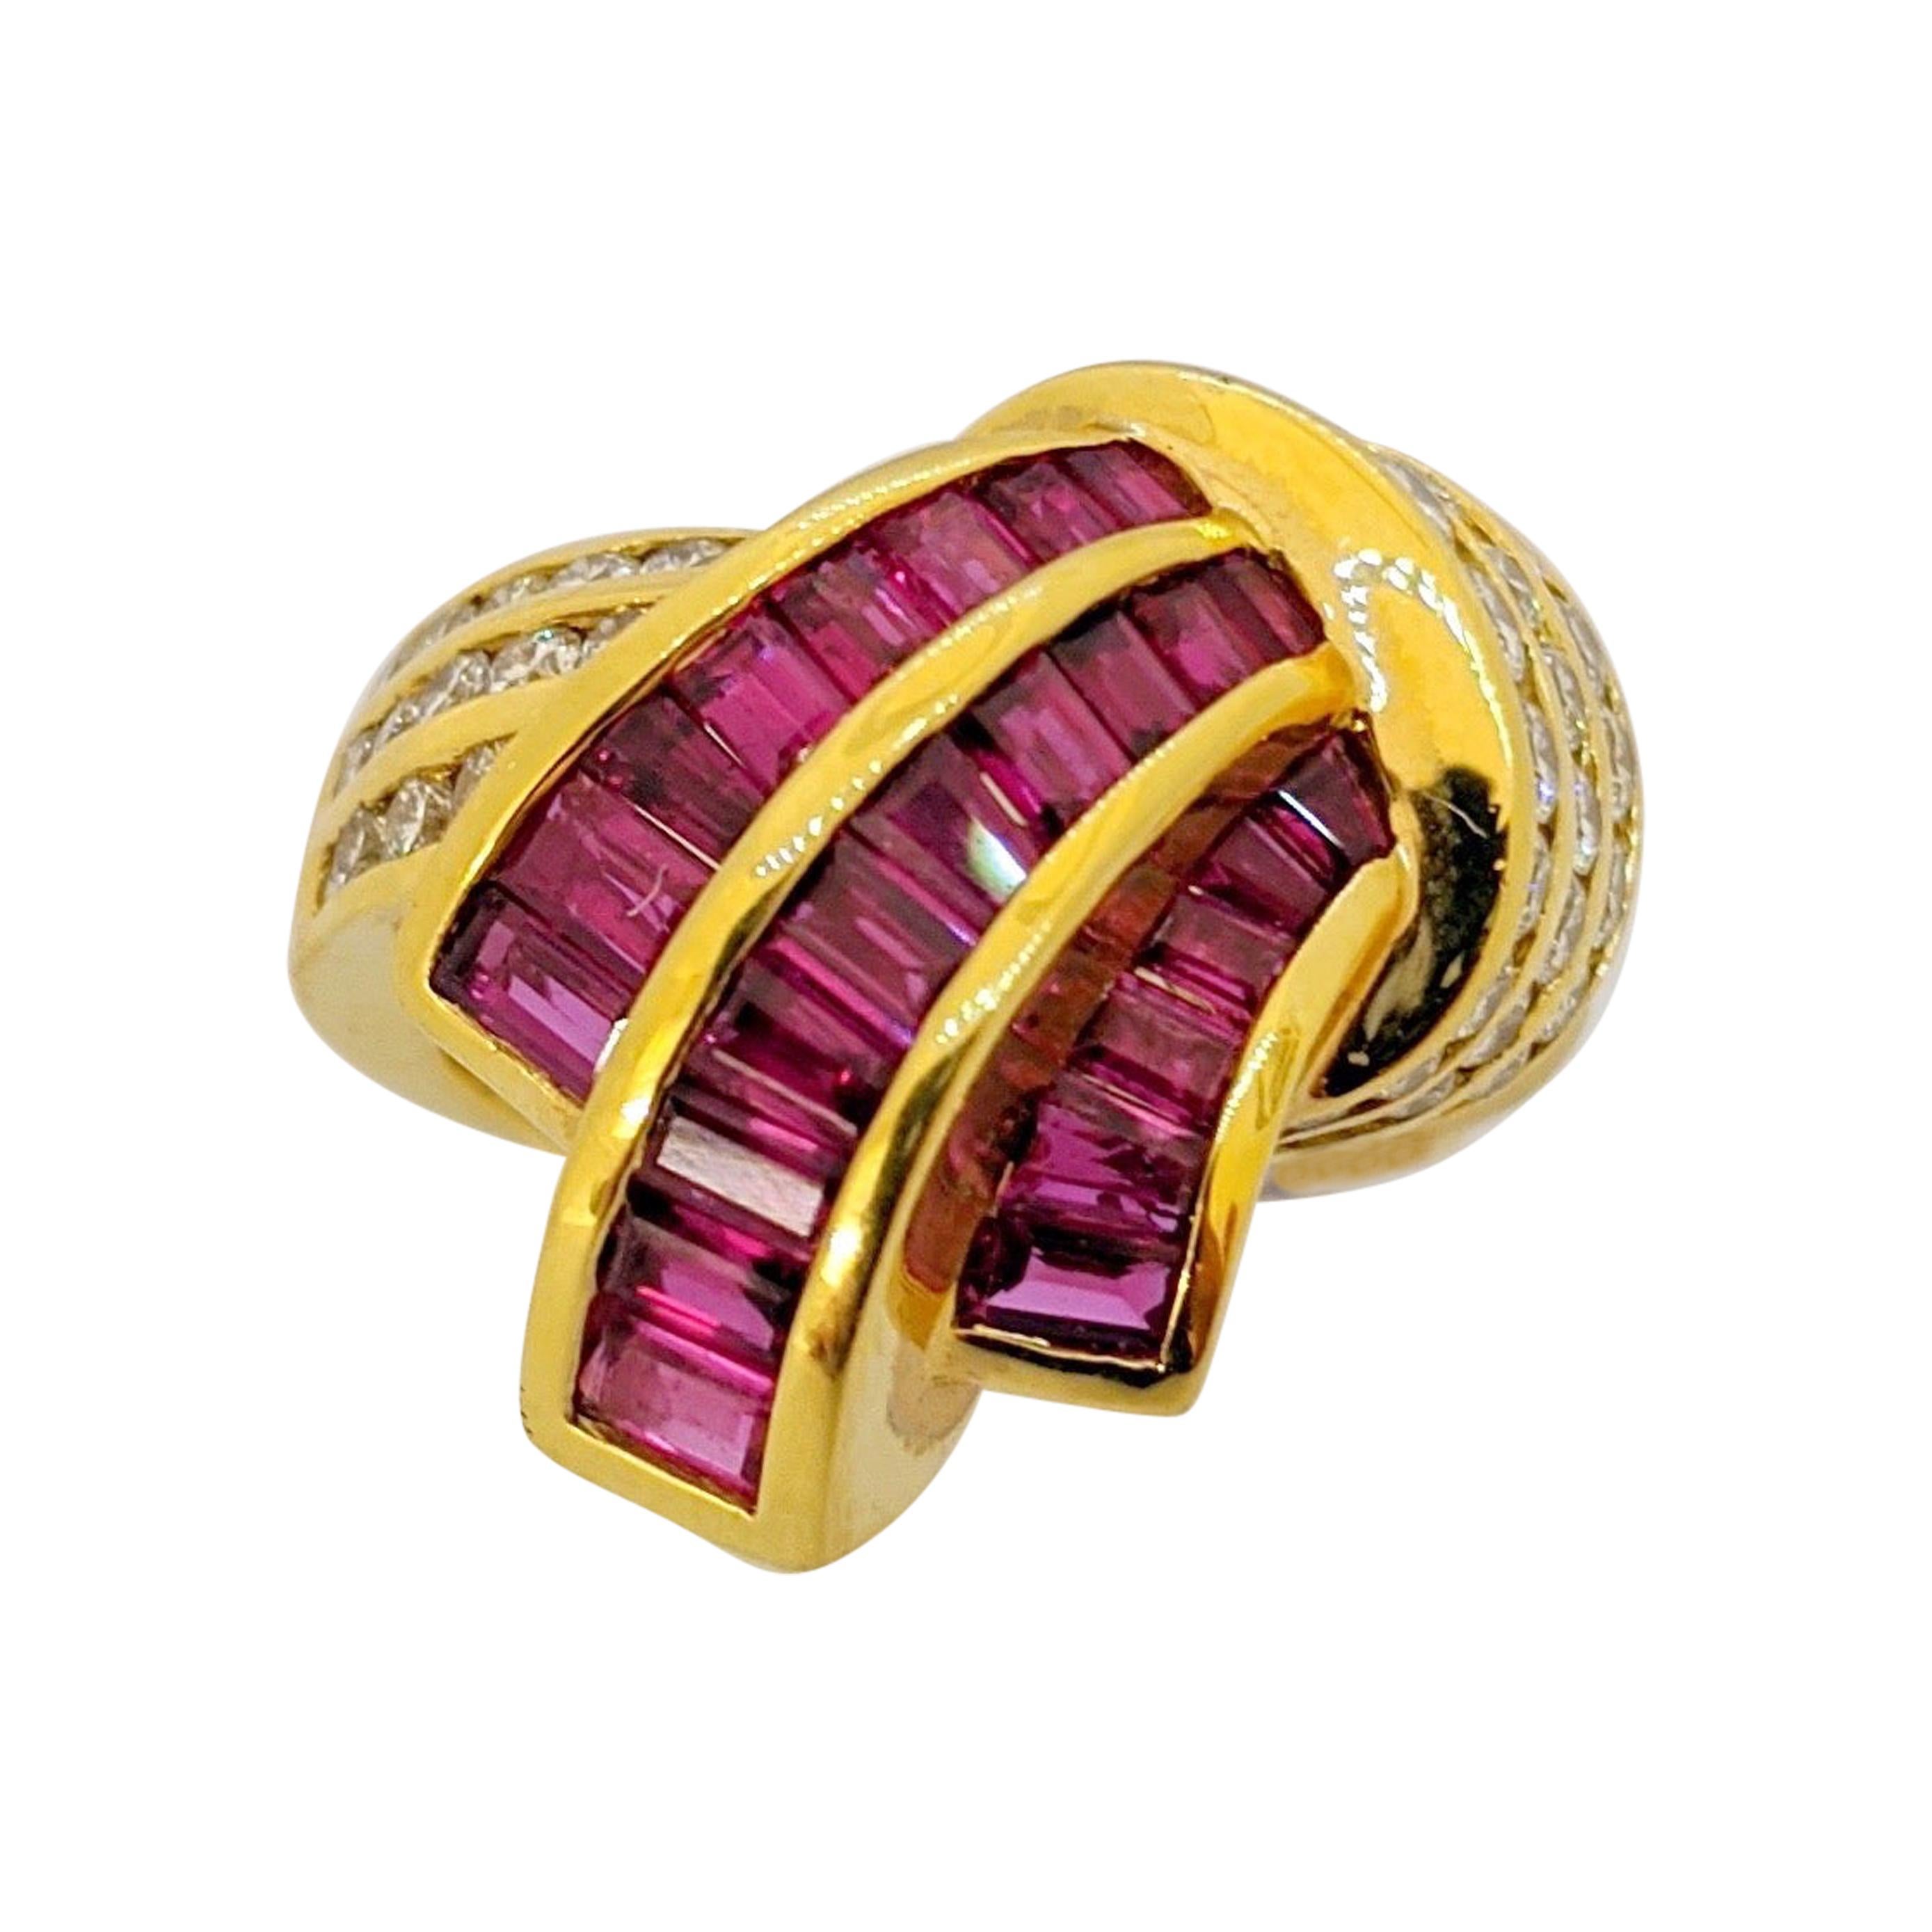 Charles Krypell 18 Karat Yellow Gold Invisibly Set 2.25Ct. Ruby and Diamond Ring